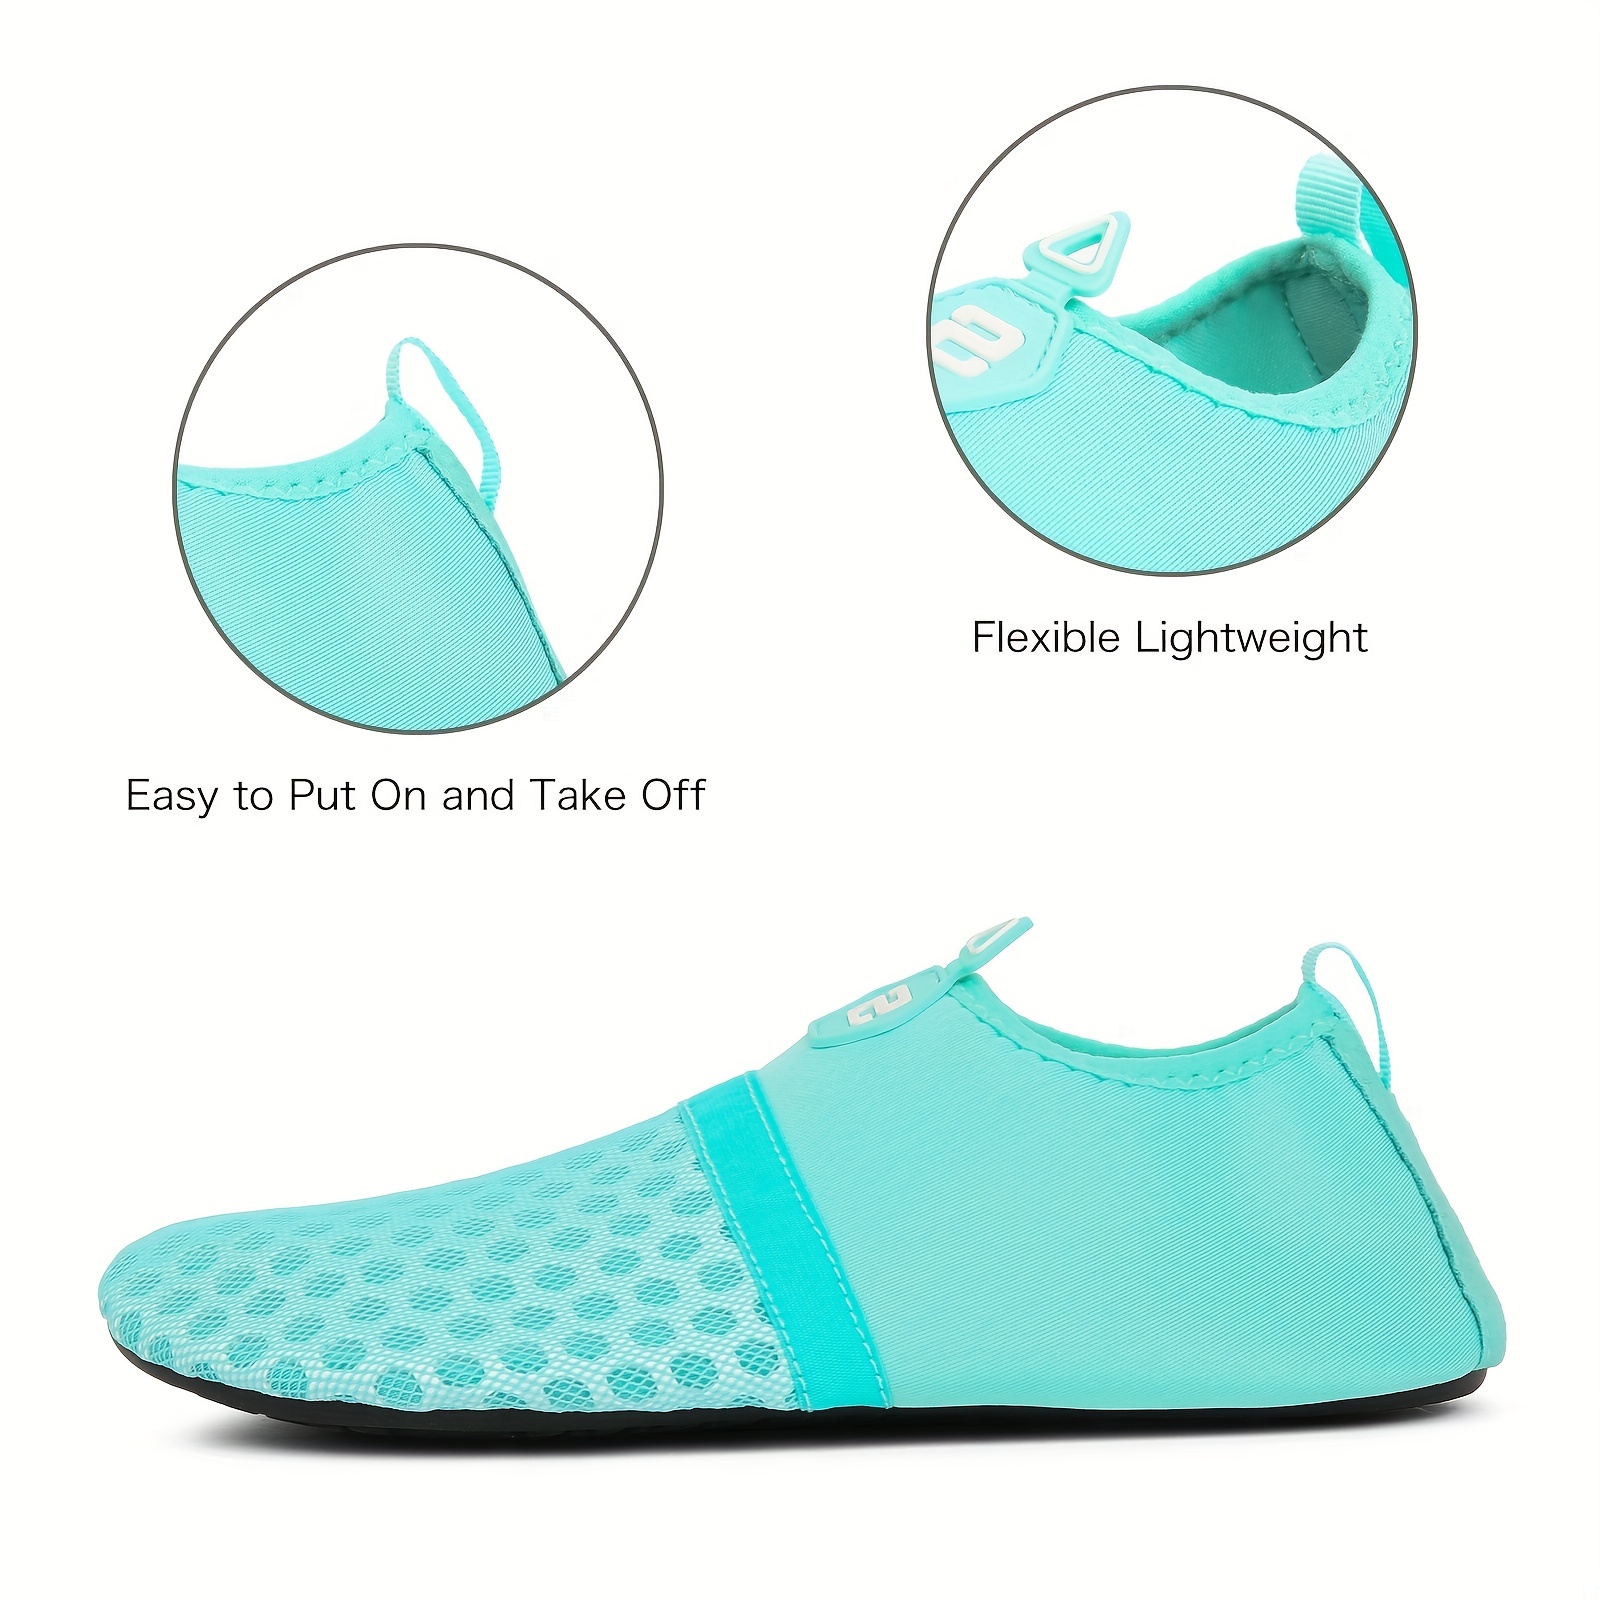 Unisex Water Shoes for Pool Quick Dry Flexible Water Skin Swimming Shoes  Non Slip Barefoot Socks, Green